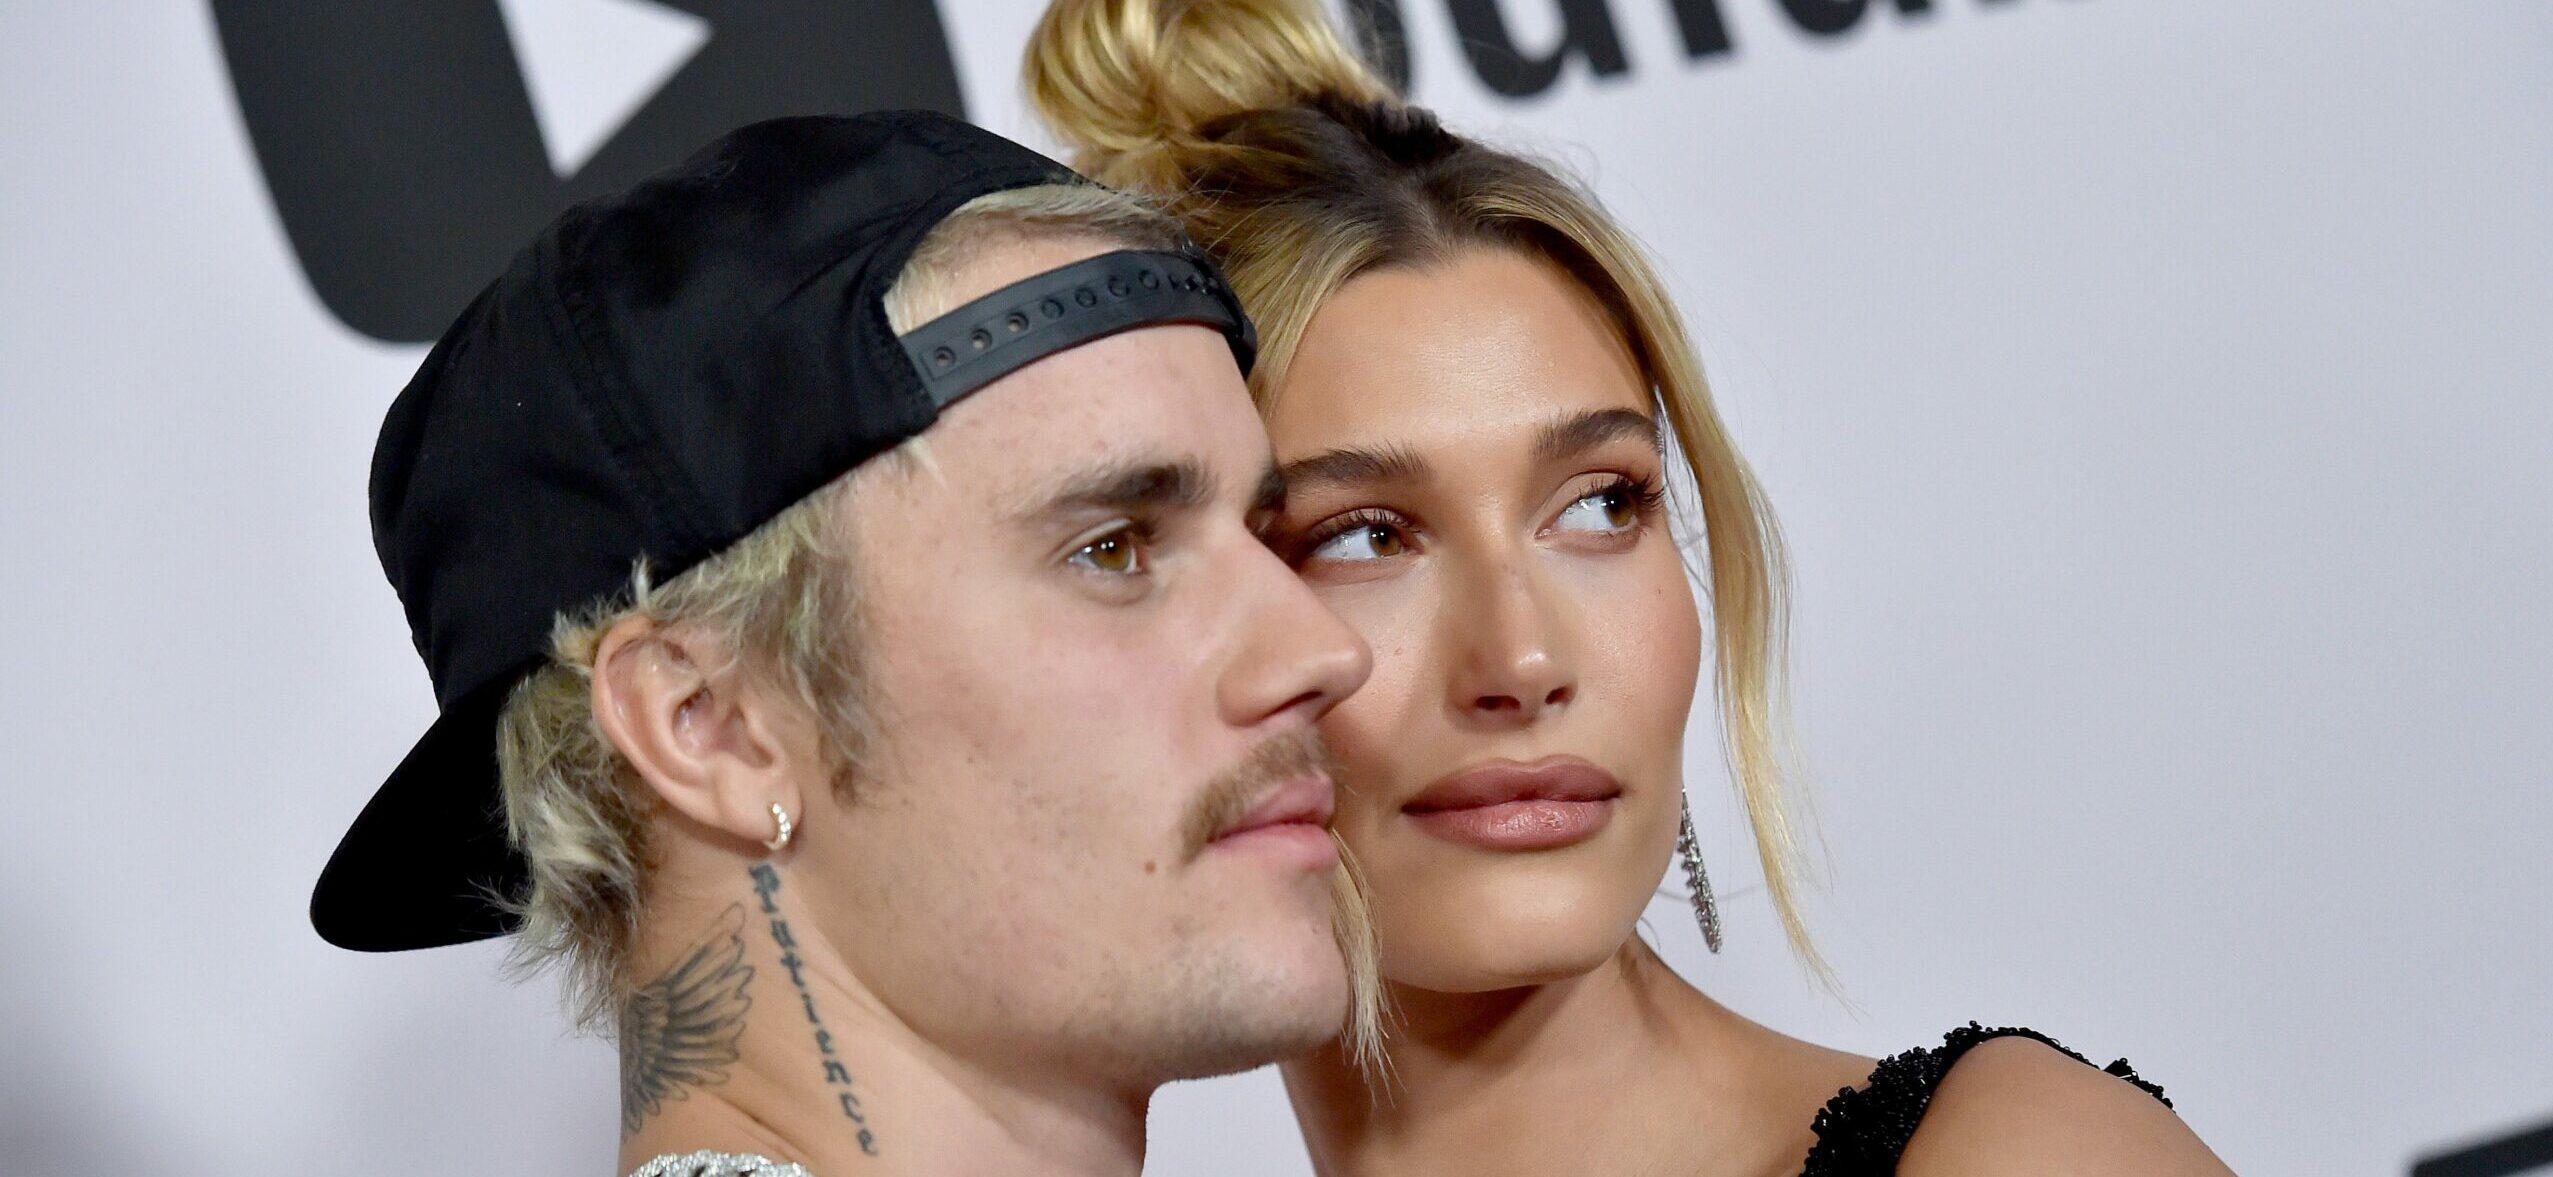 Justin Bieber Reportedly Cut Ties With Kanye West After Attack On Wife Hailey Bieber